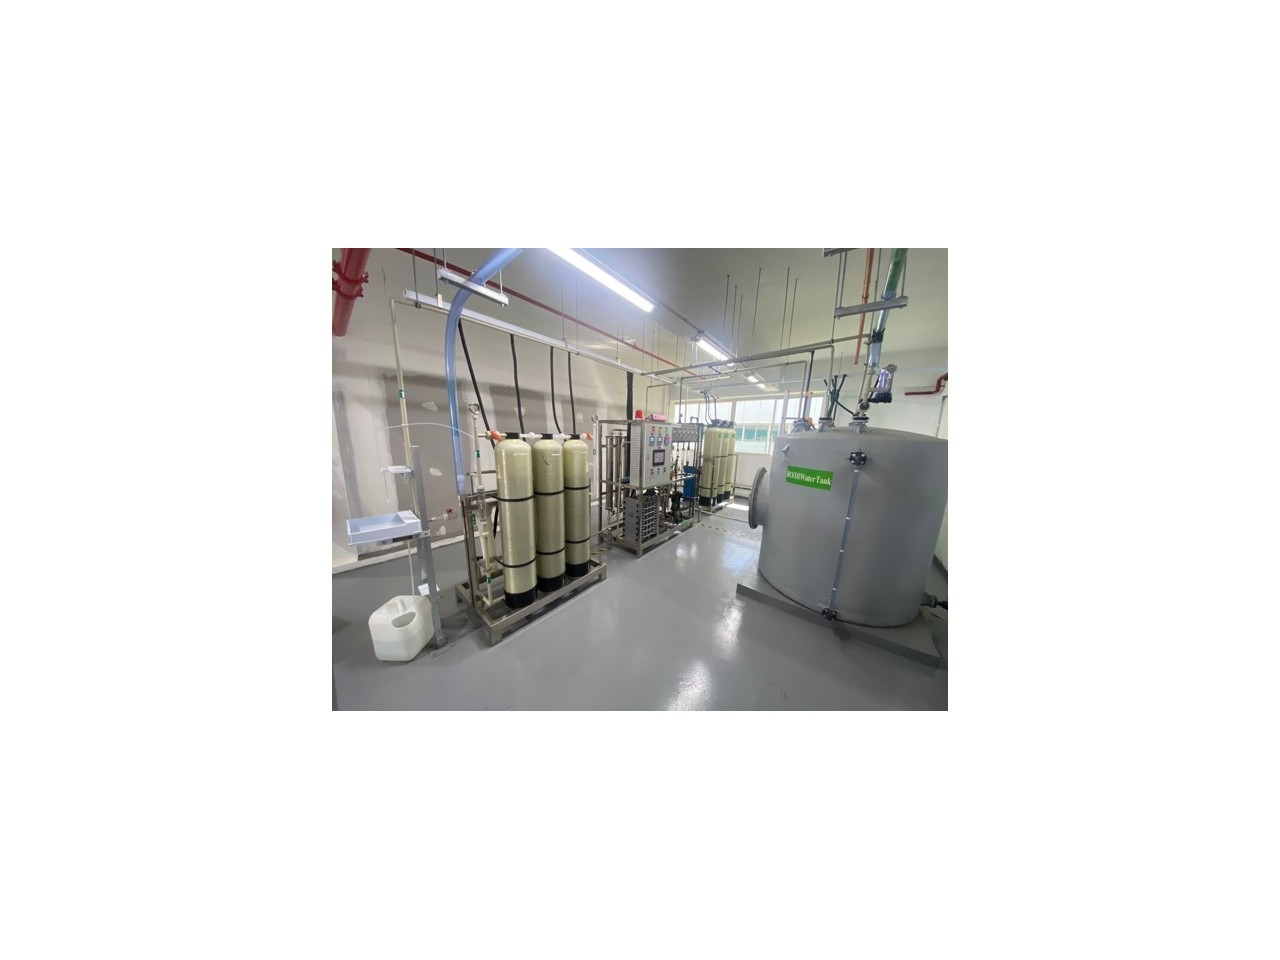 ASTM Type I Ultrapure Water Treatment System